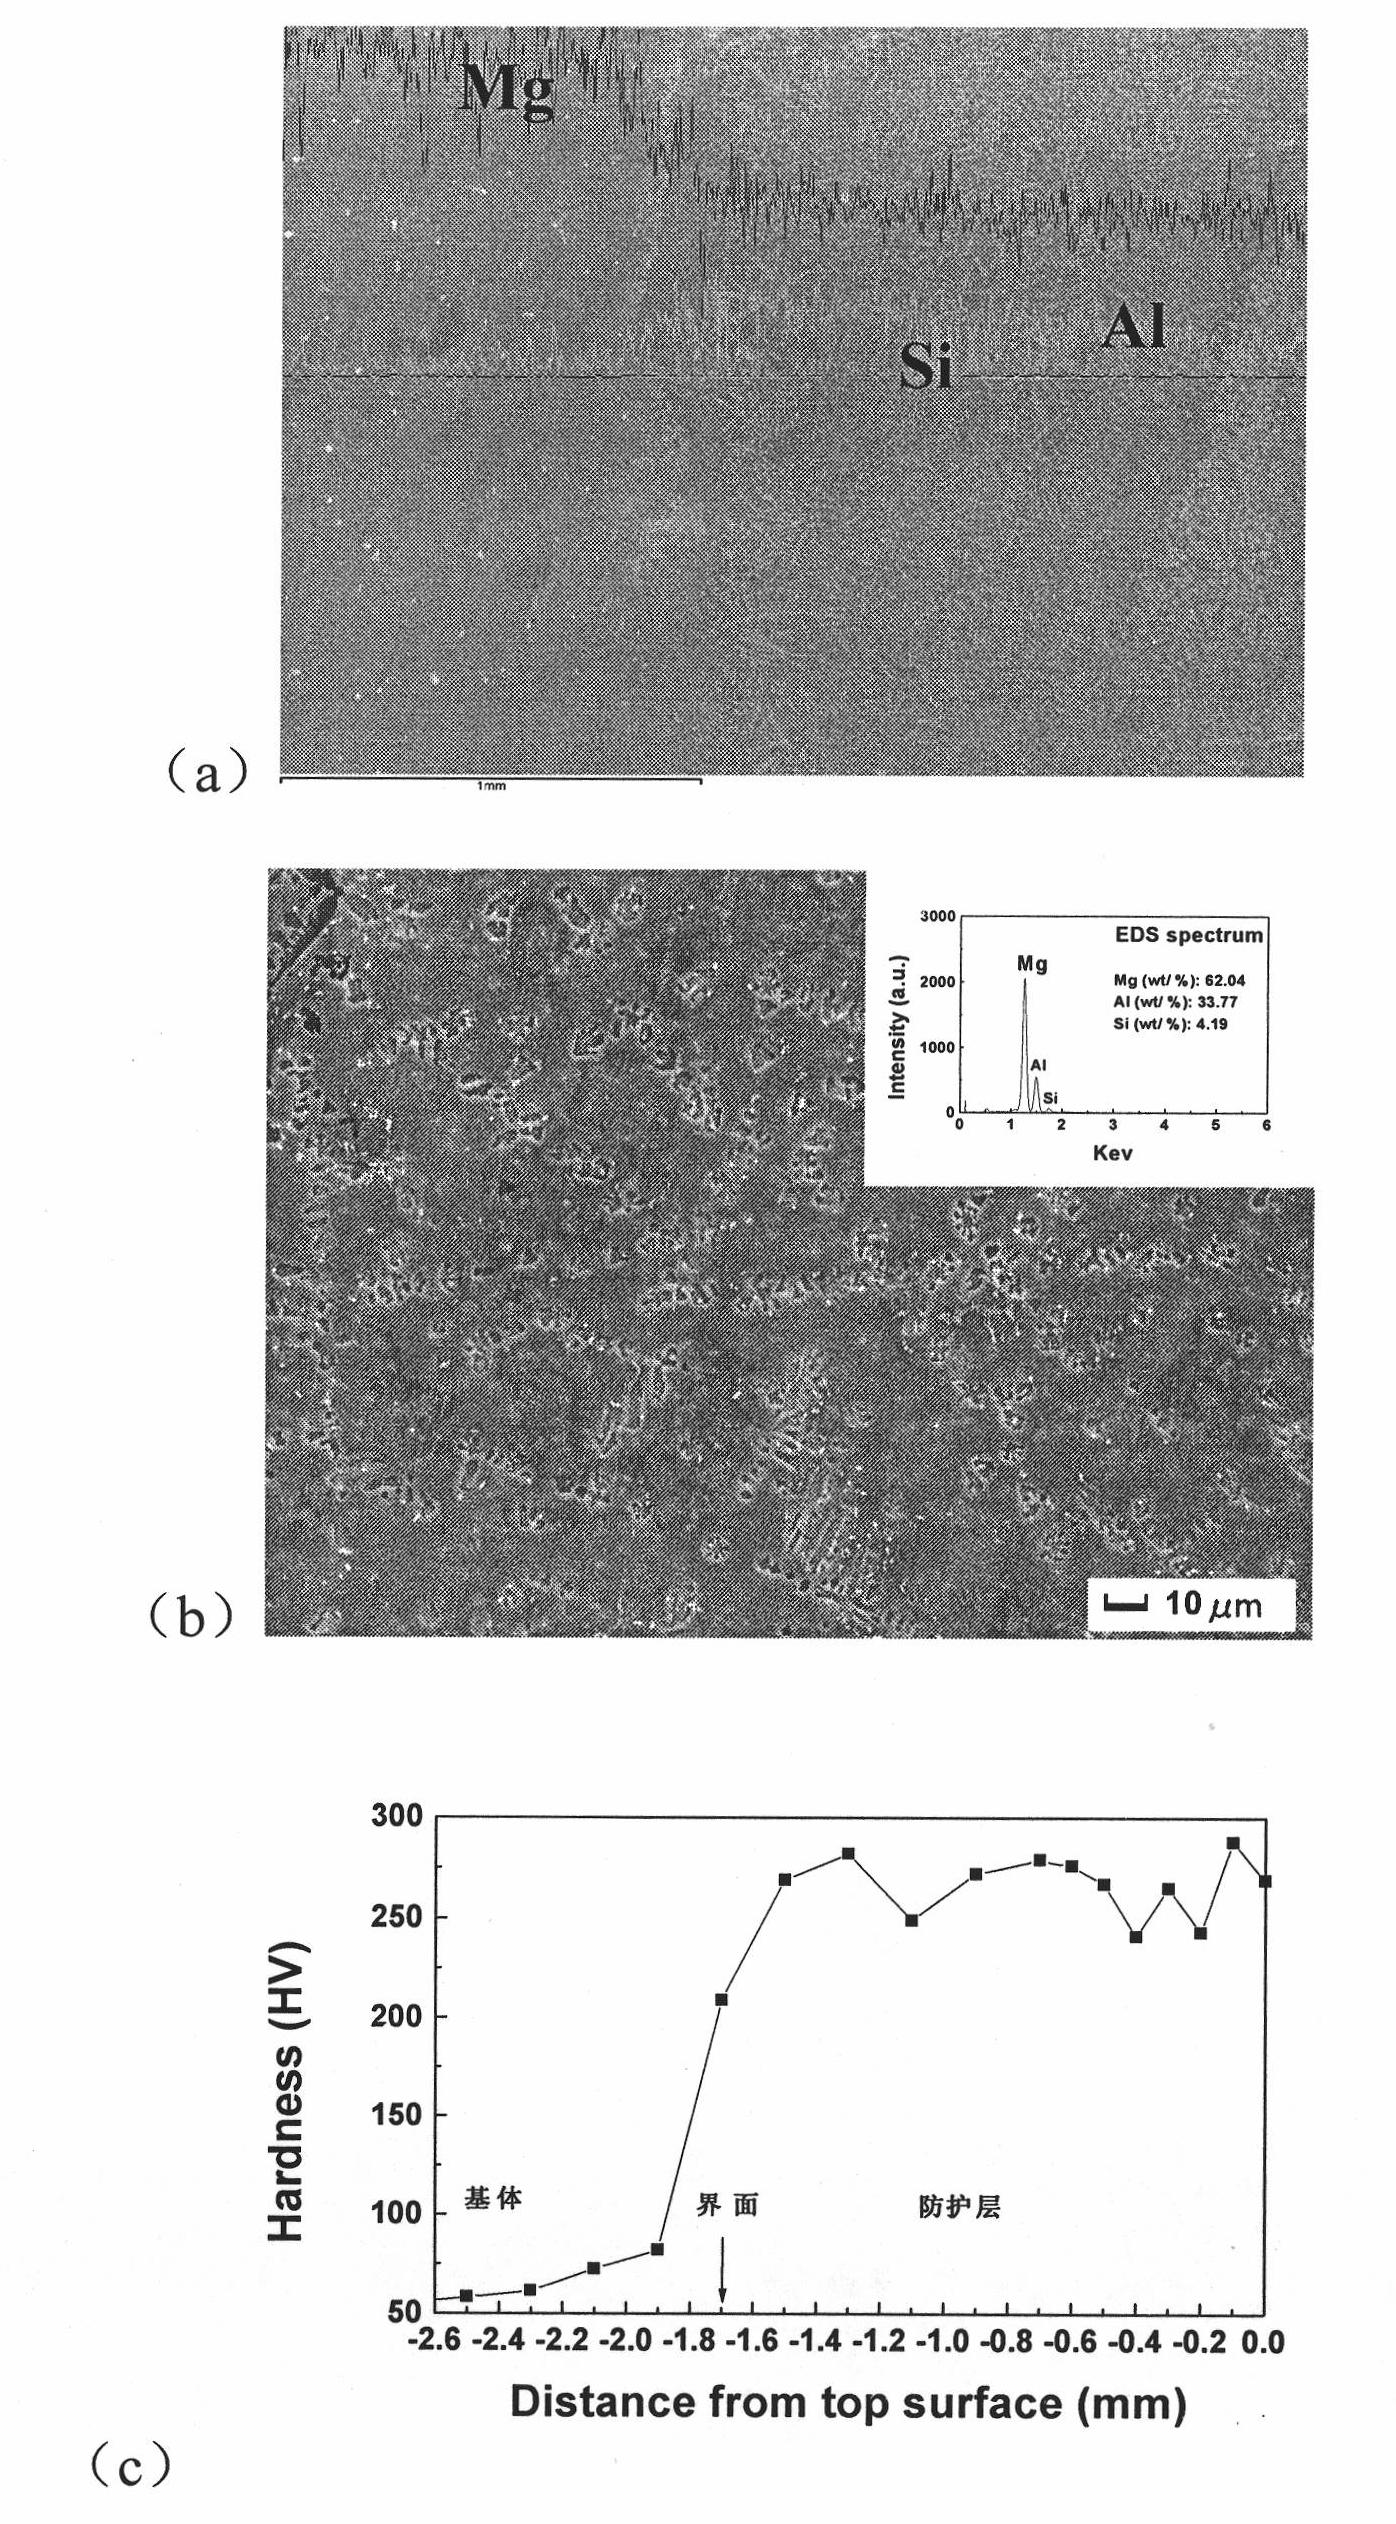 Process for preparing compact thick protection layers on magnesium alloy surfaces